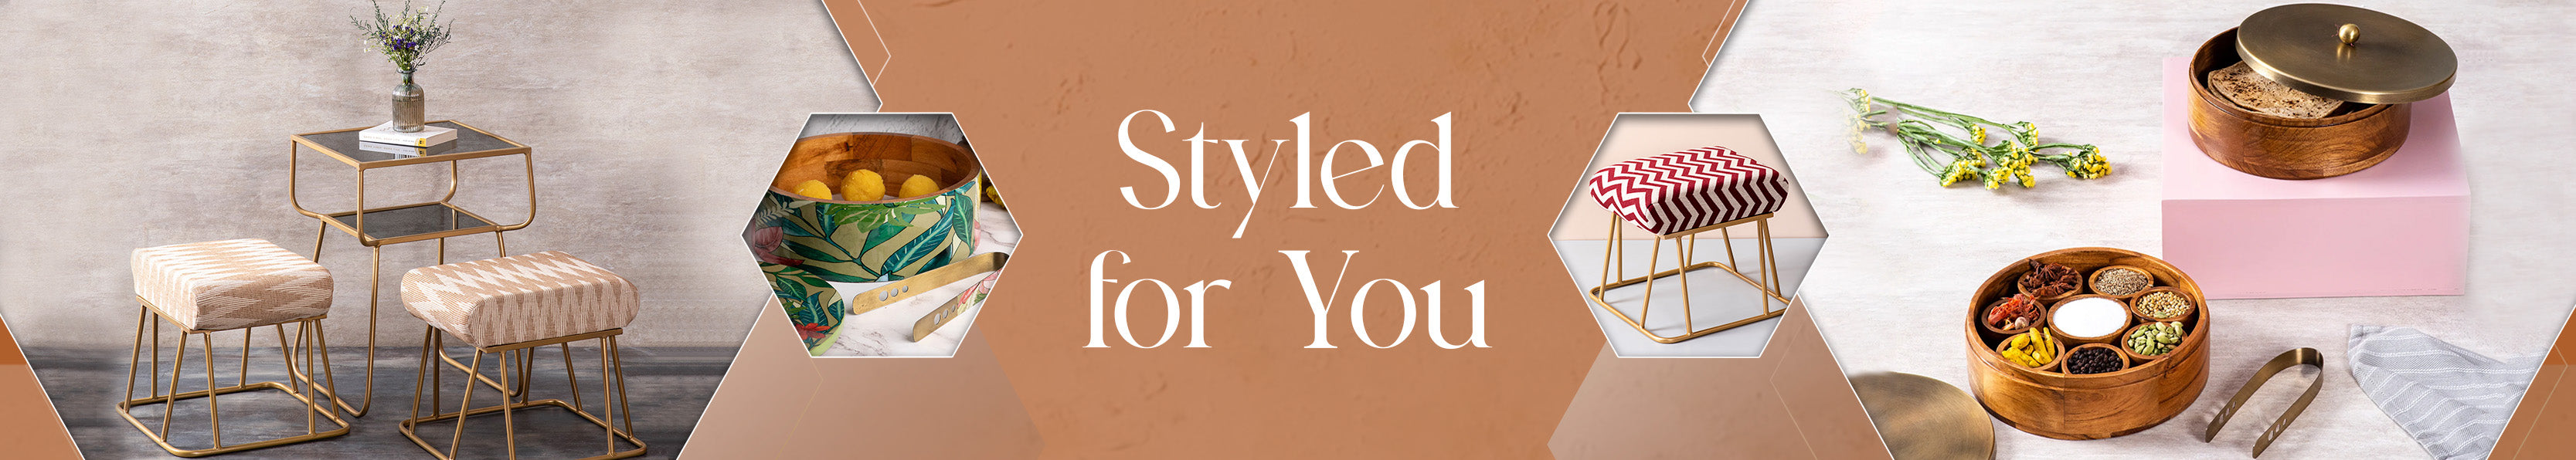 Styled for You